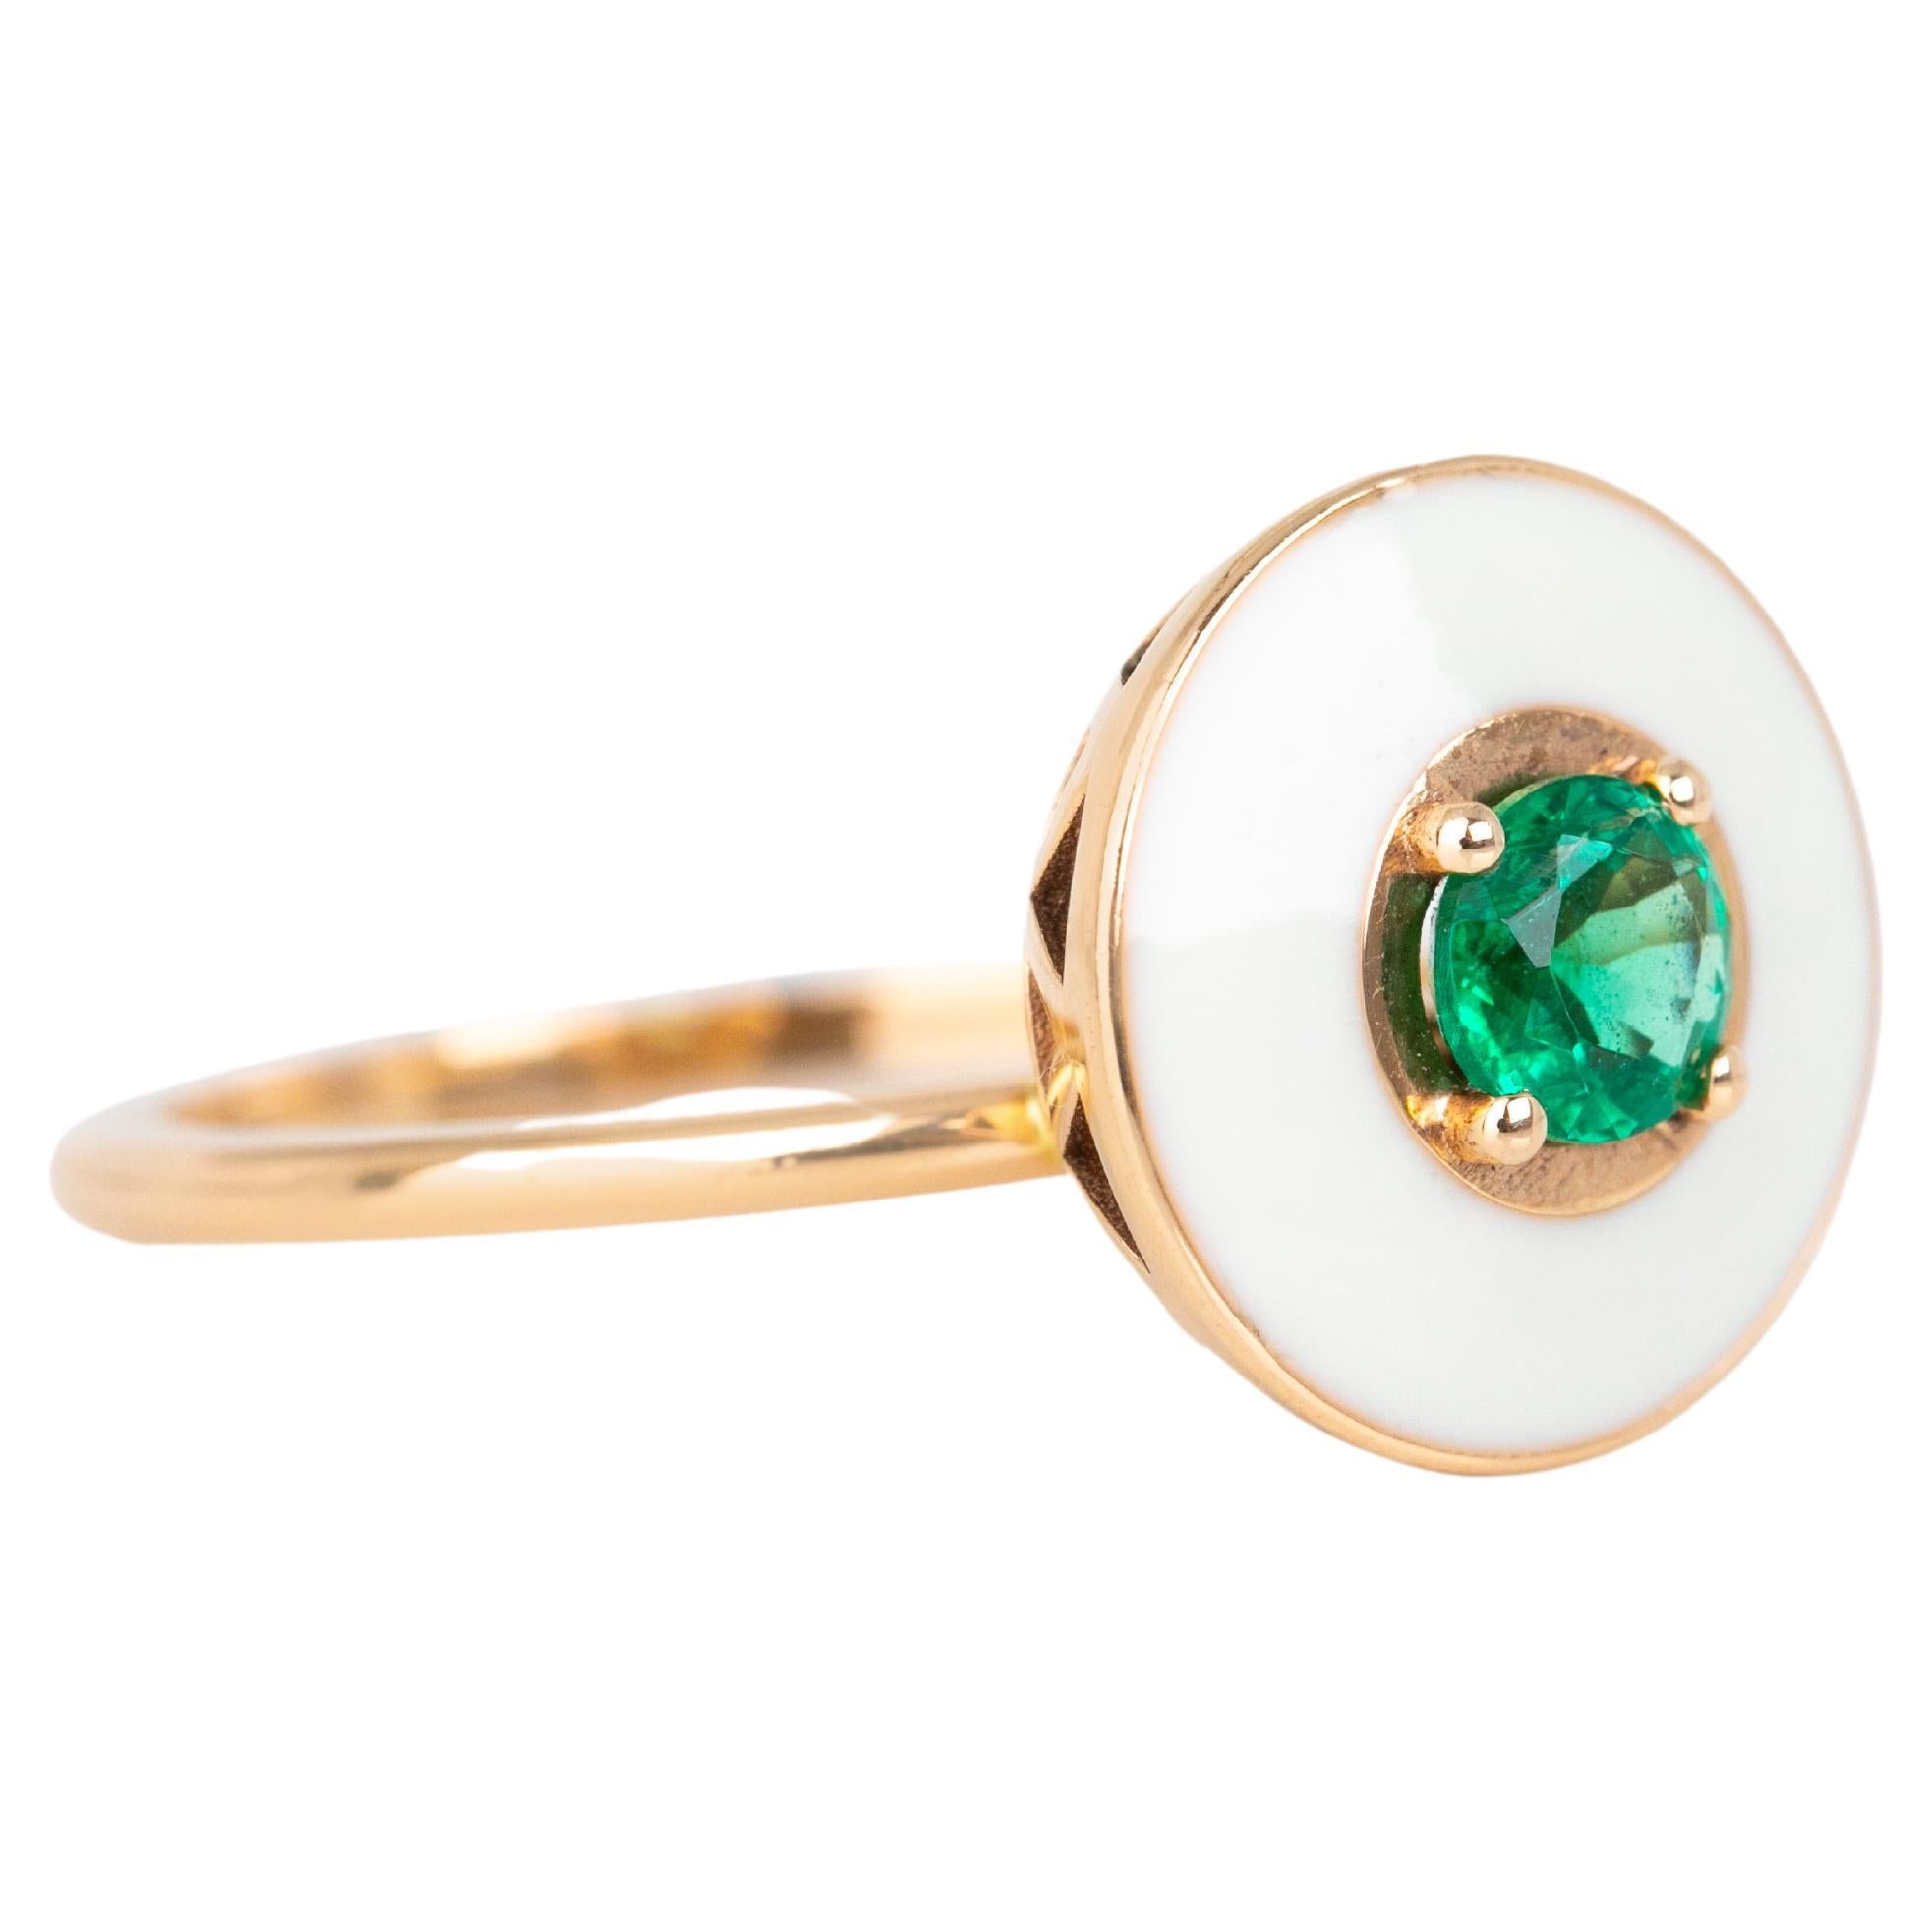 For Sale:  14k Gold Art Deco Stlye Enameled 0.38 Ct Emerald Cocktail Ring 2